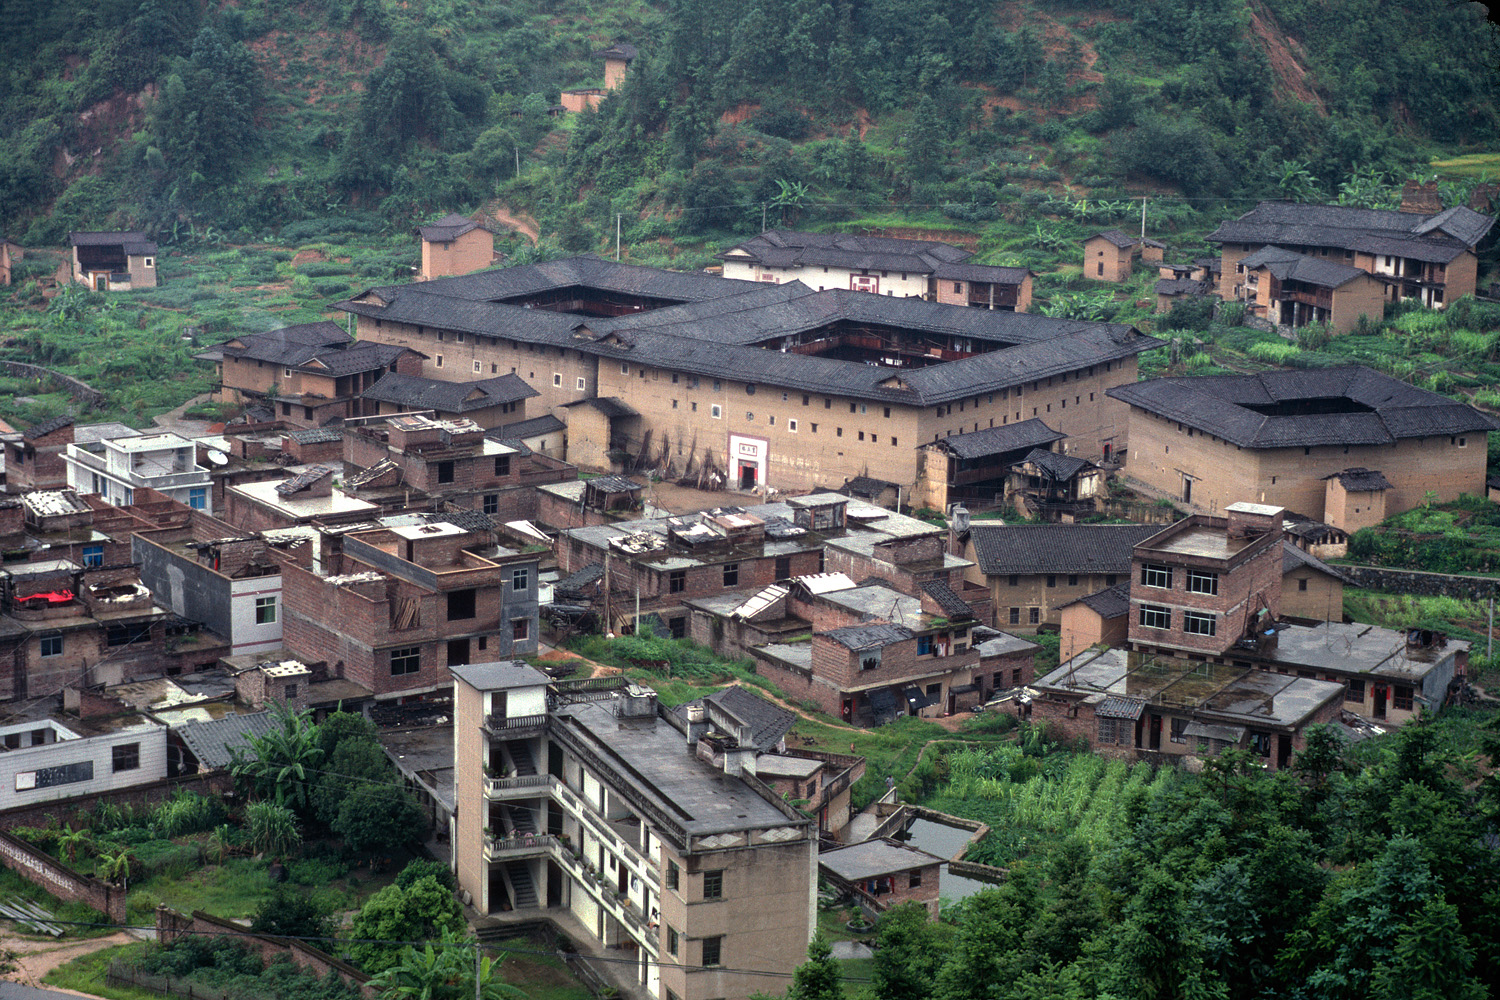 bill-hocker-the-end-of-the-clan-houses-fujian-province-china-2002